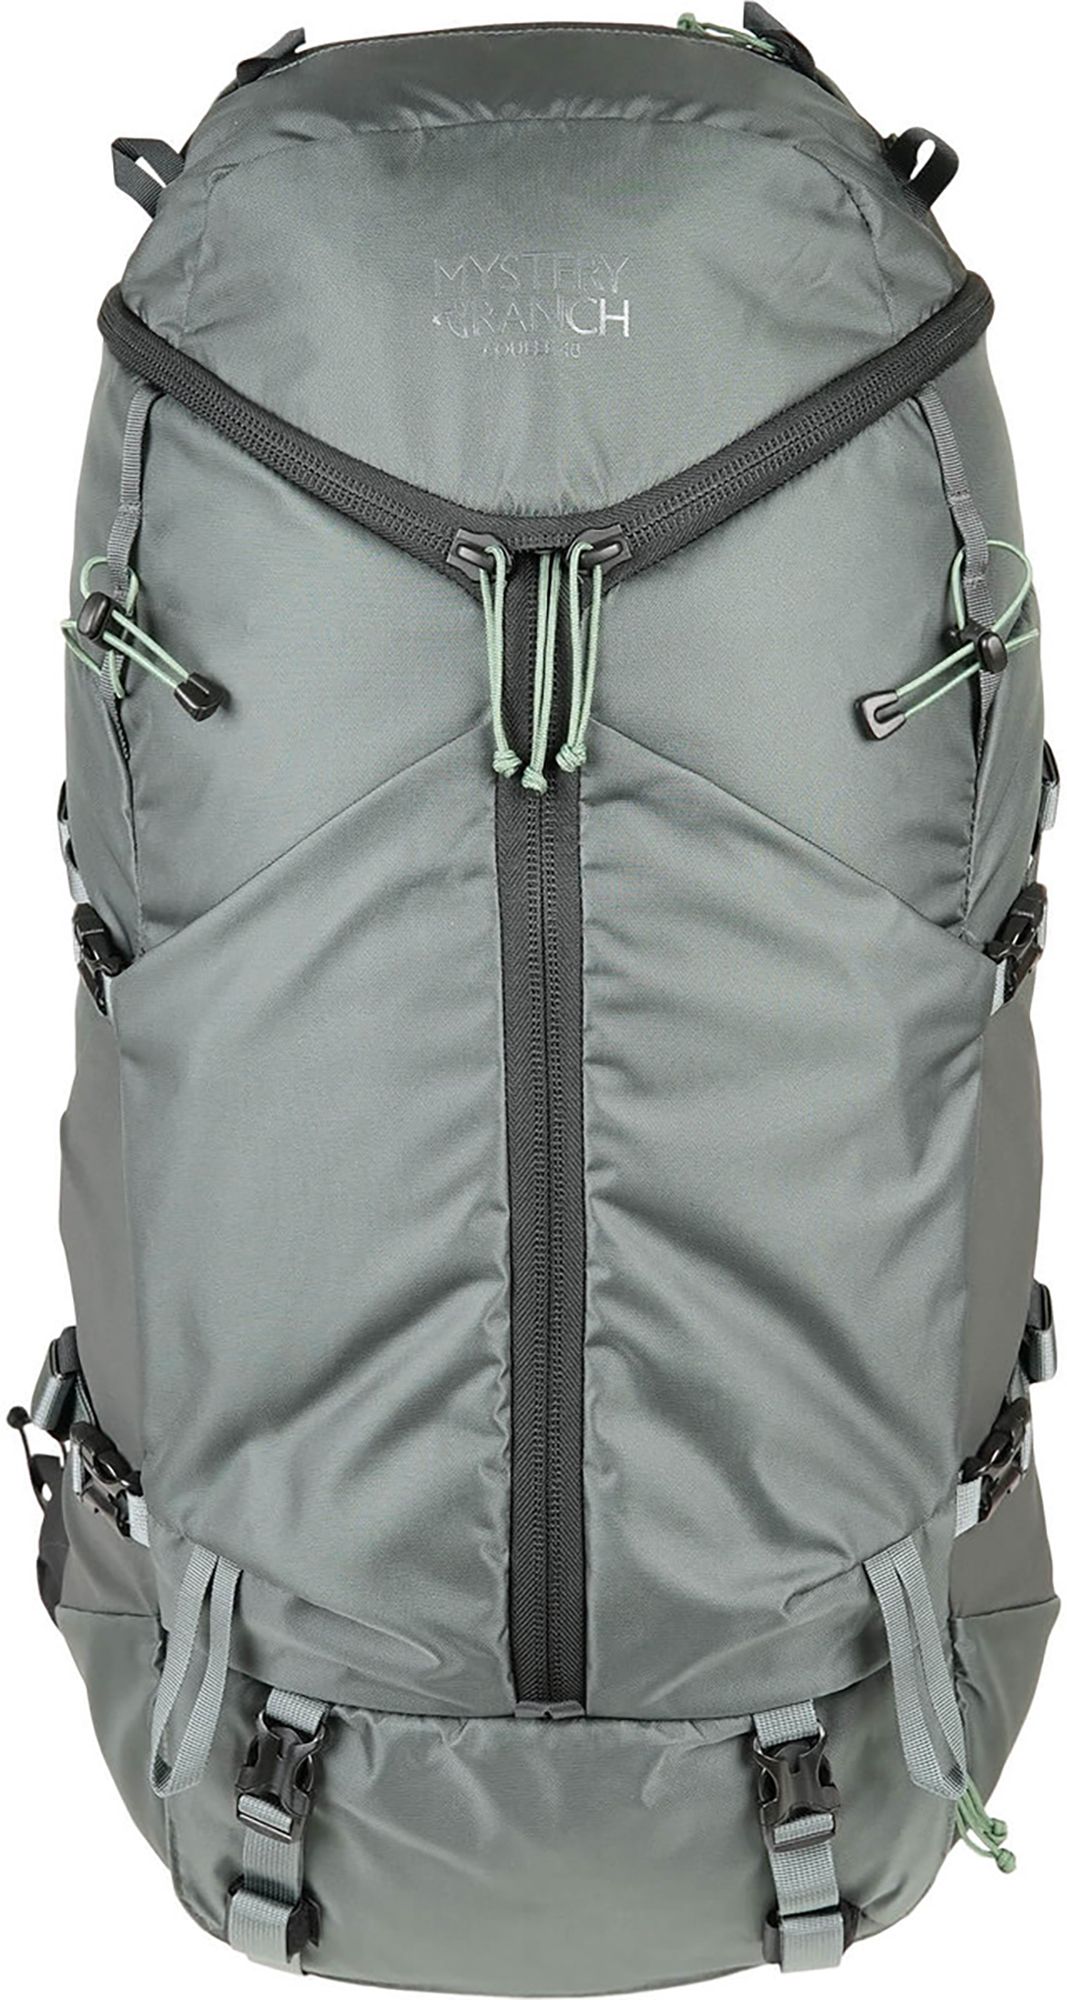 Photos - Knife / Multitool Mystery Ranch Men's Coulee 40 Backpack, Large, Mineral Grey 24ZZFMMCL40XXX 